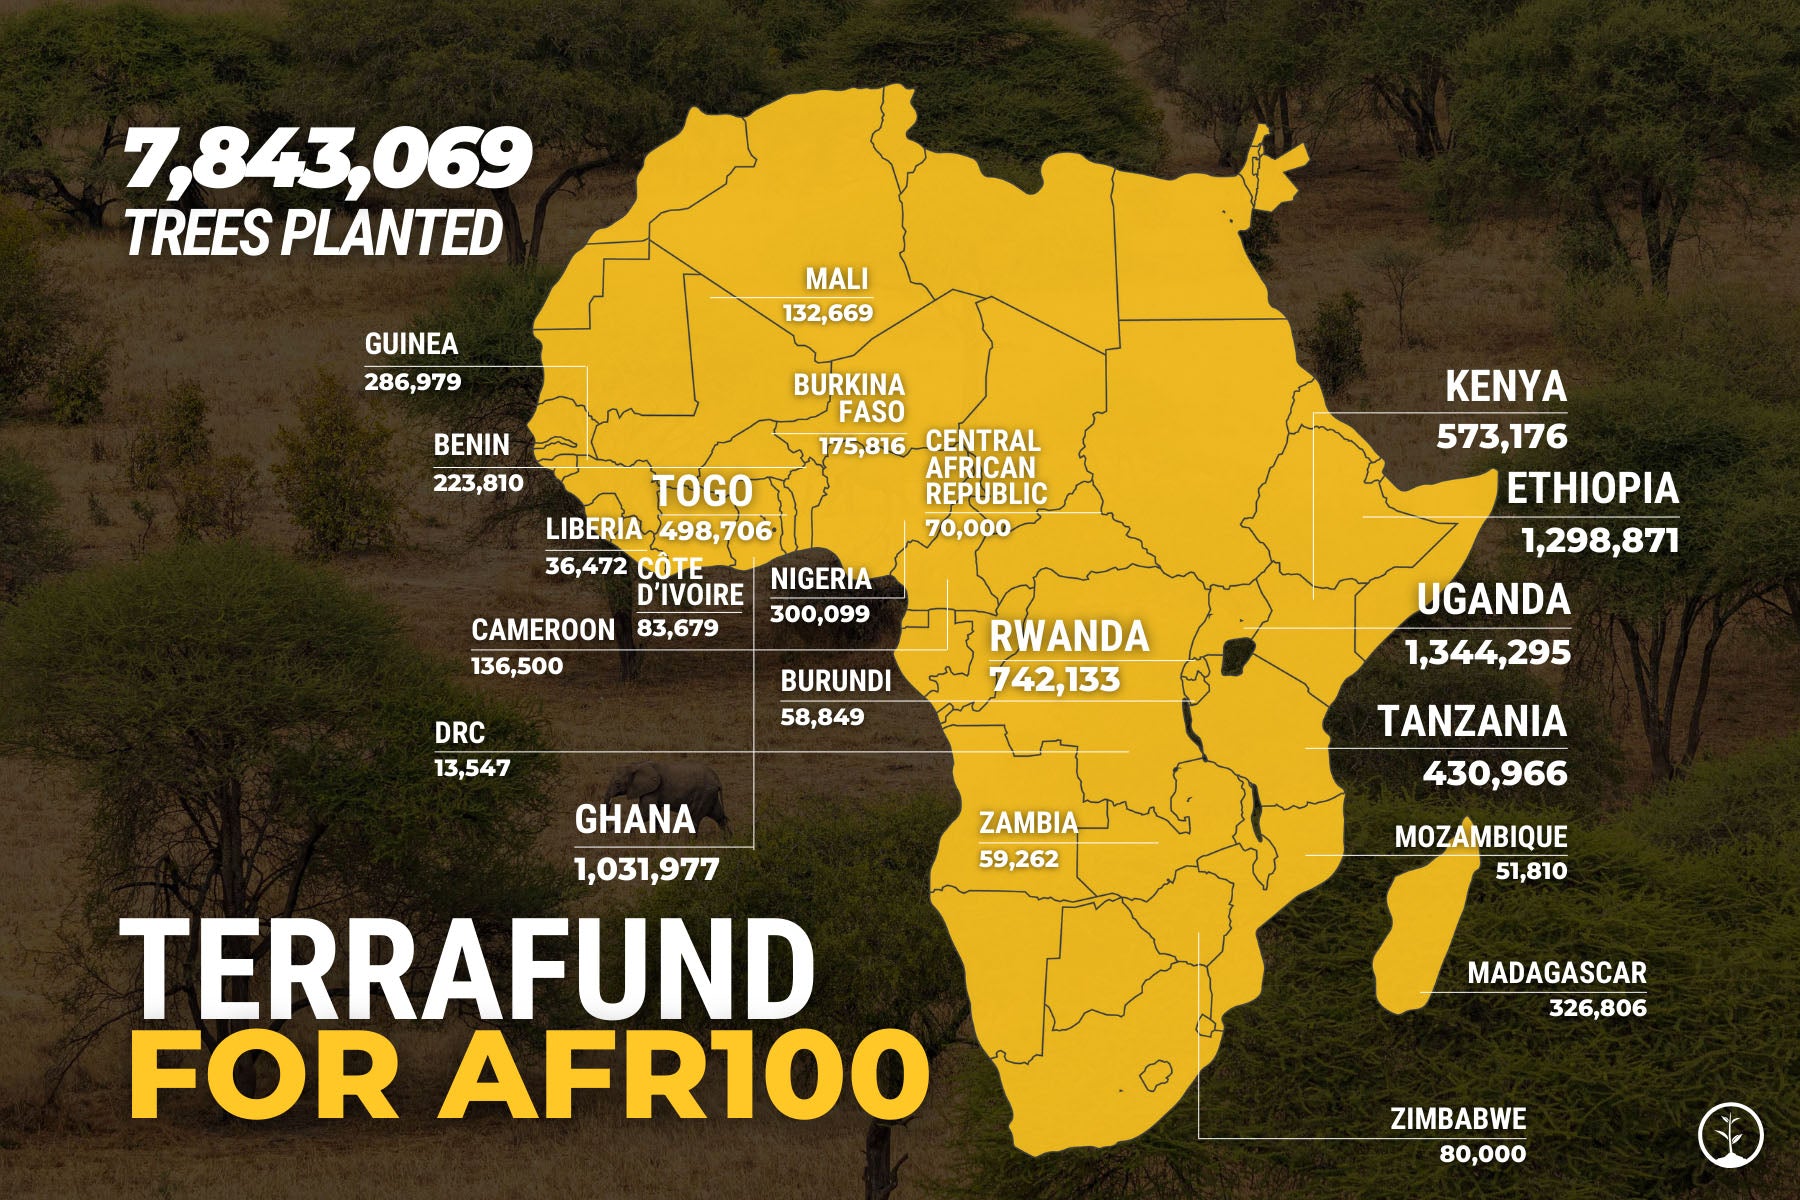 Terrafund for AFR100 Map 2023 Impact Report